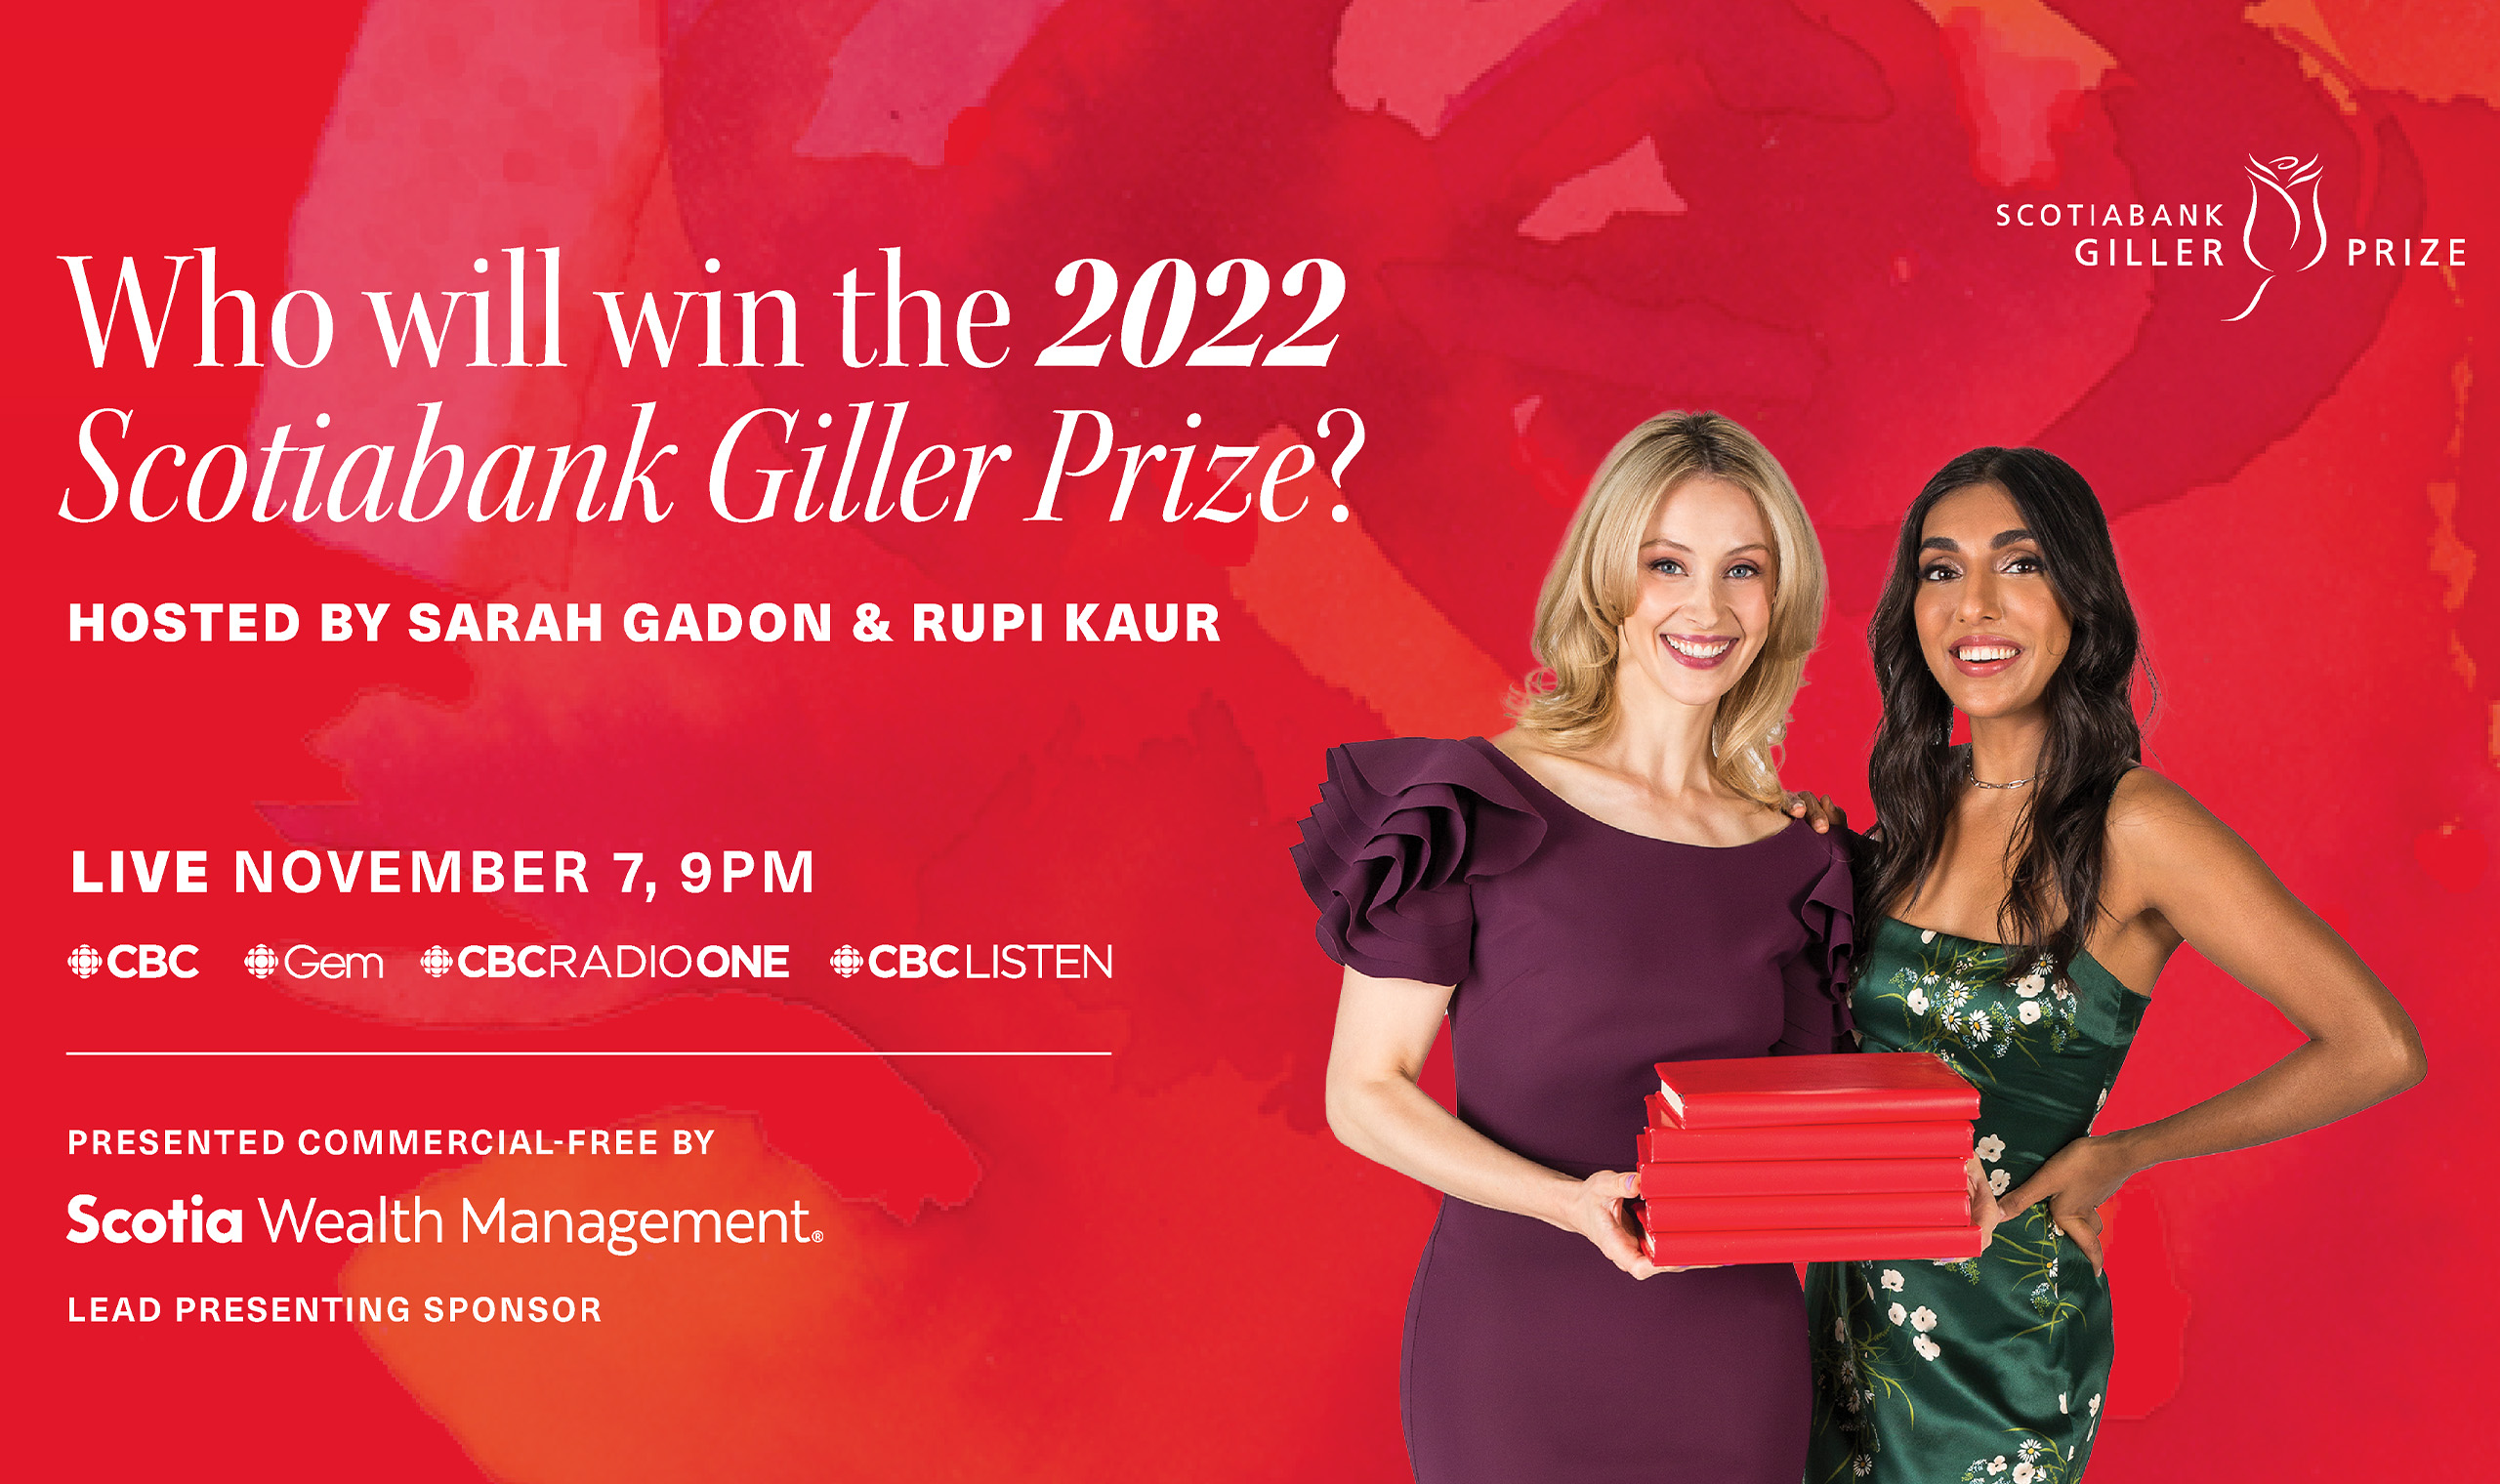 How to Watch the 2022 Scotiabank Giller Prize Gala